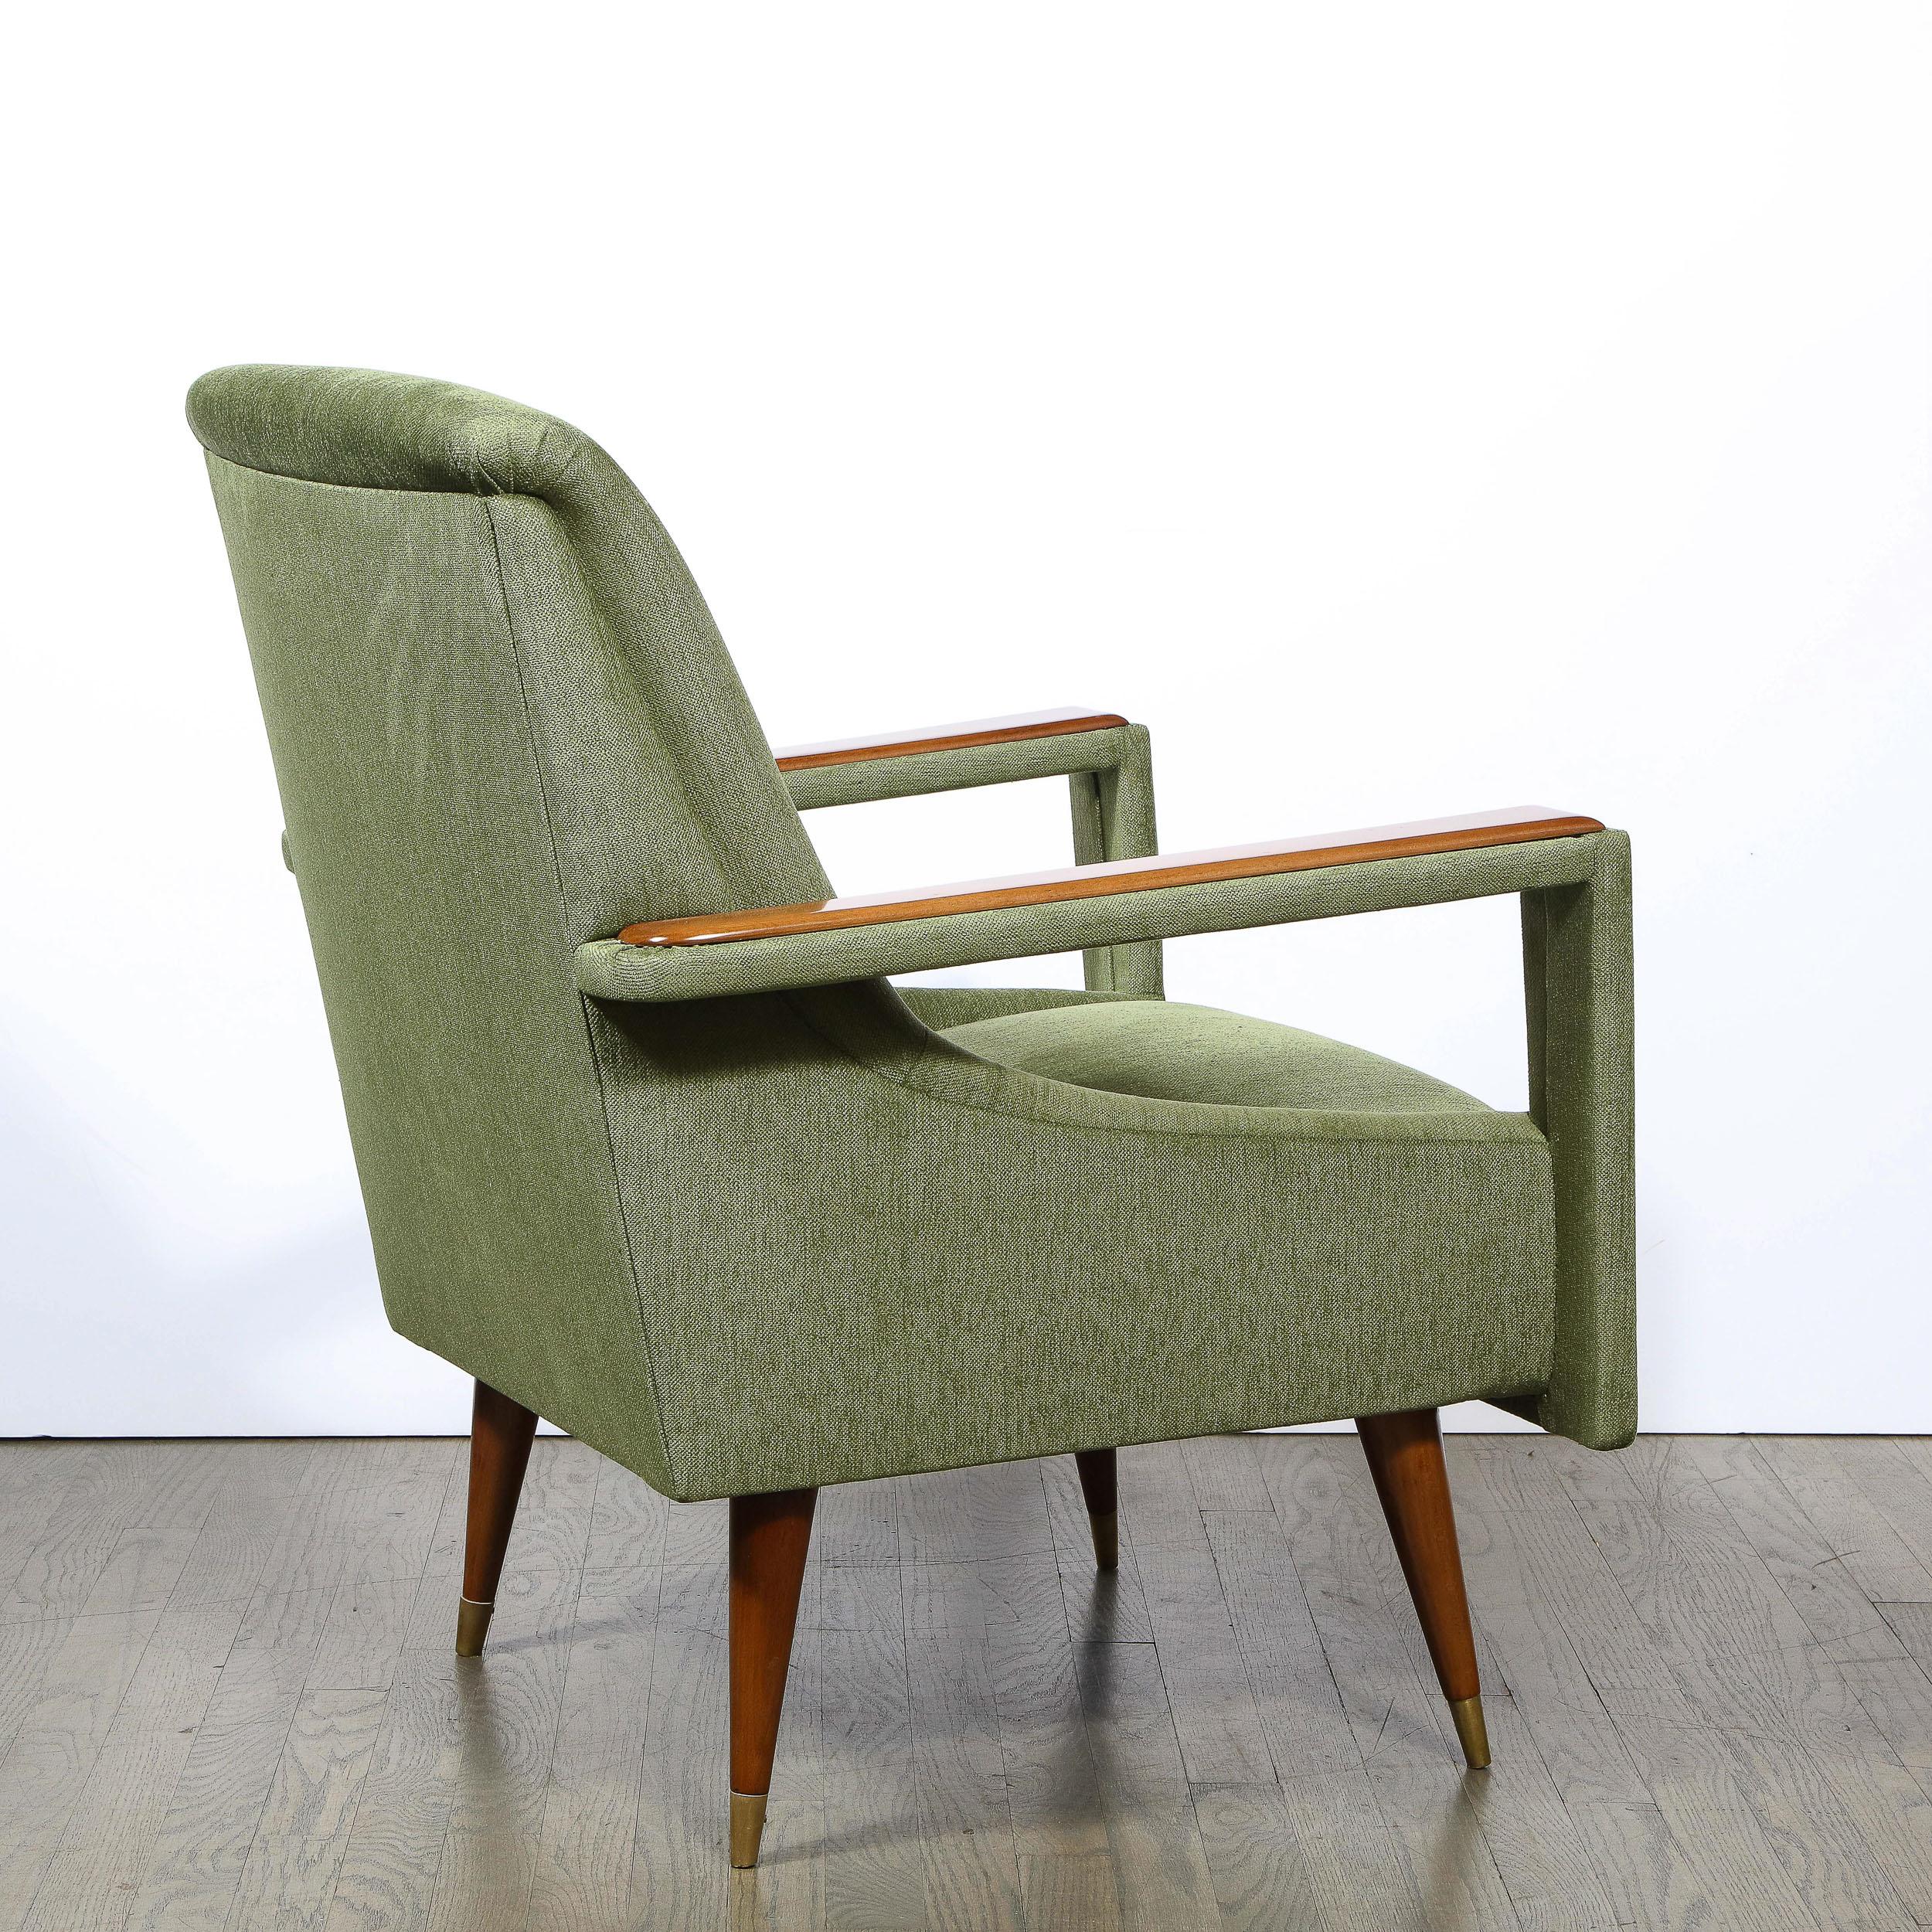 Pair of Mid-Century Modern Walnut & Moss Green Upholstery Arm Cutout Chairs 1